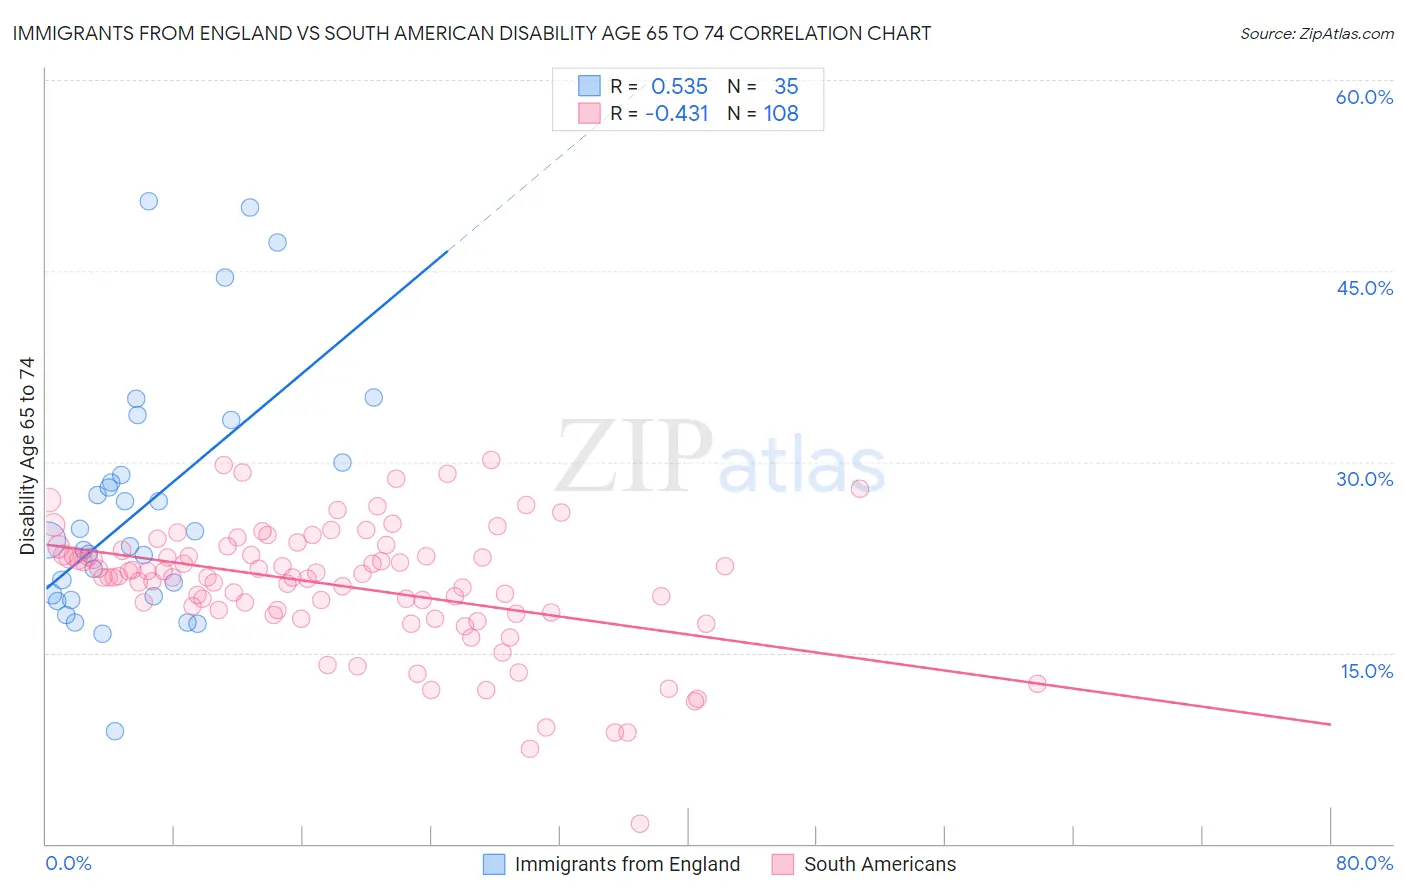 Immigrants from England vs South American Disability Age 65 to 74